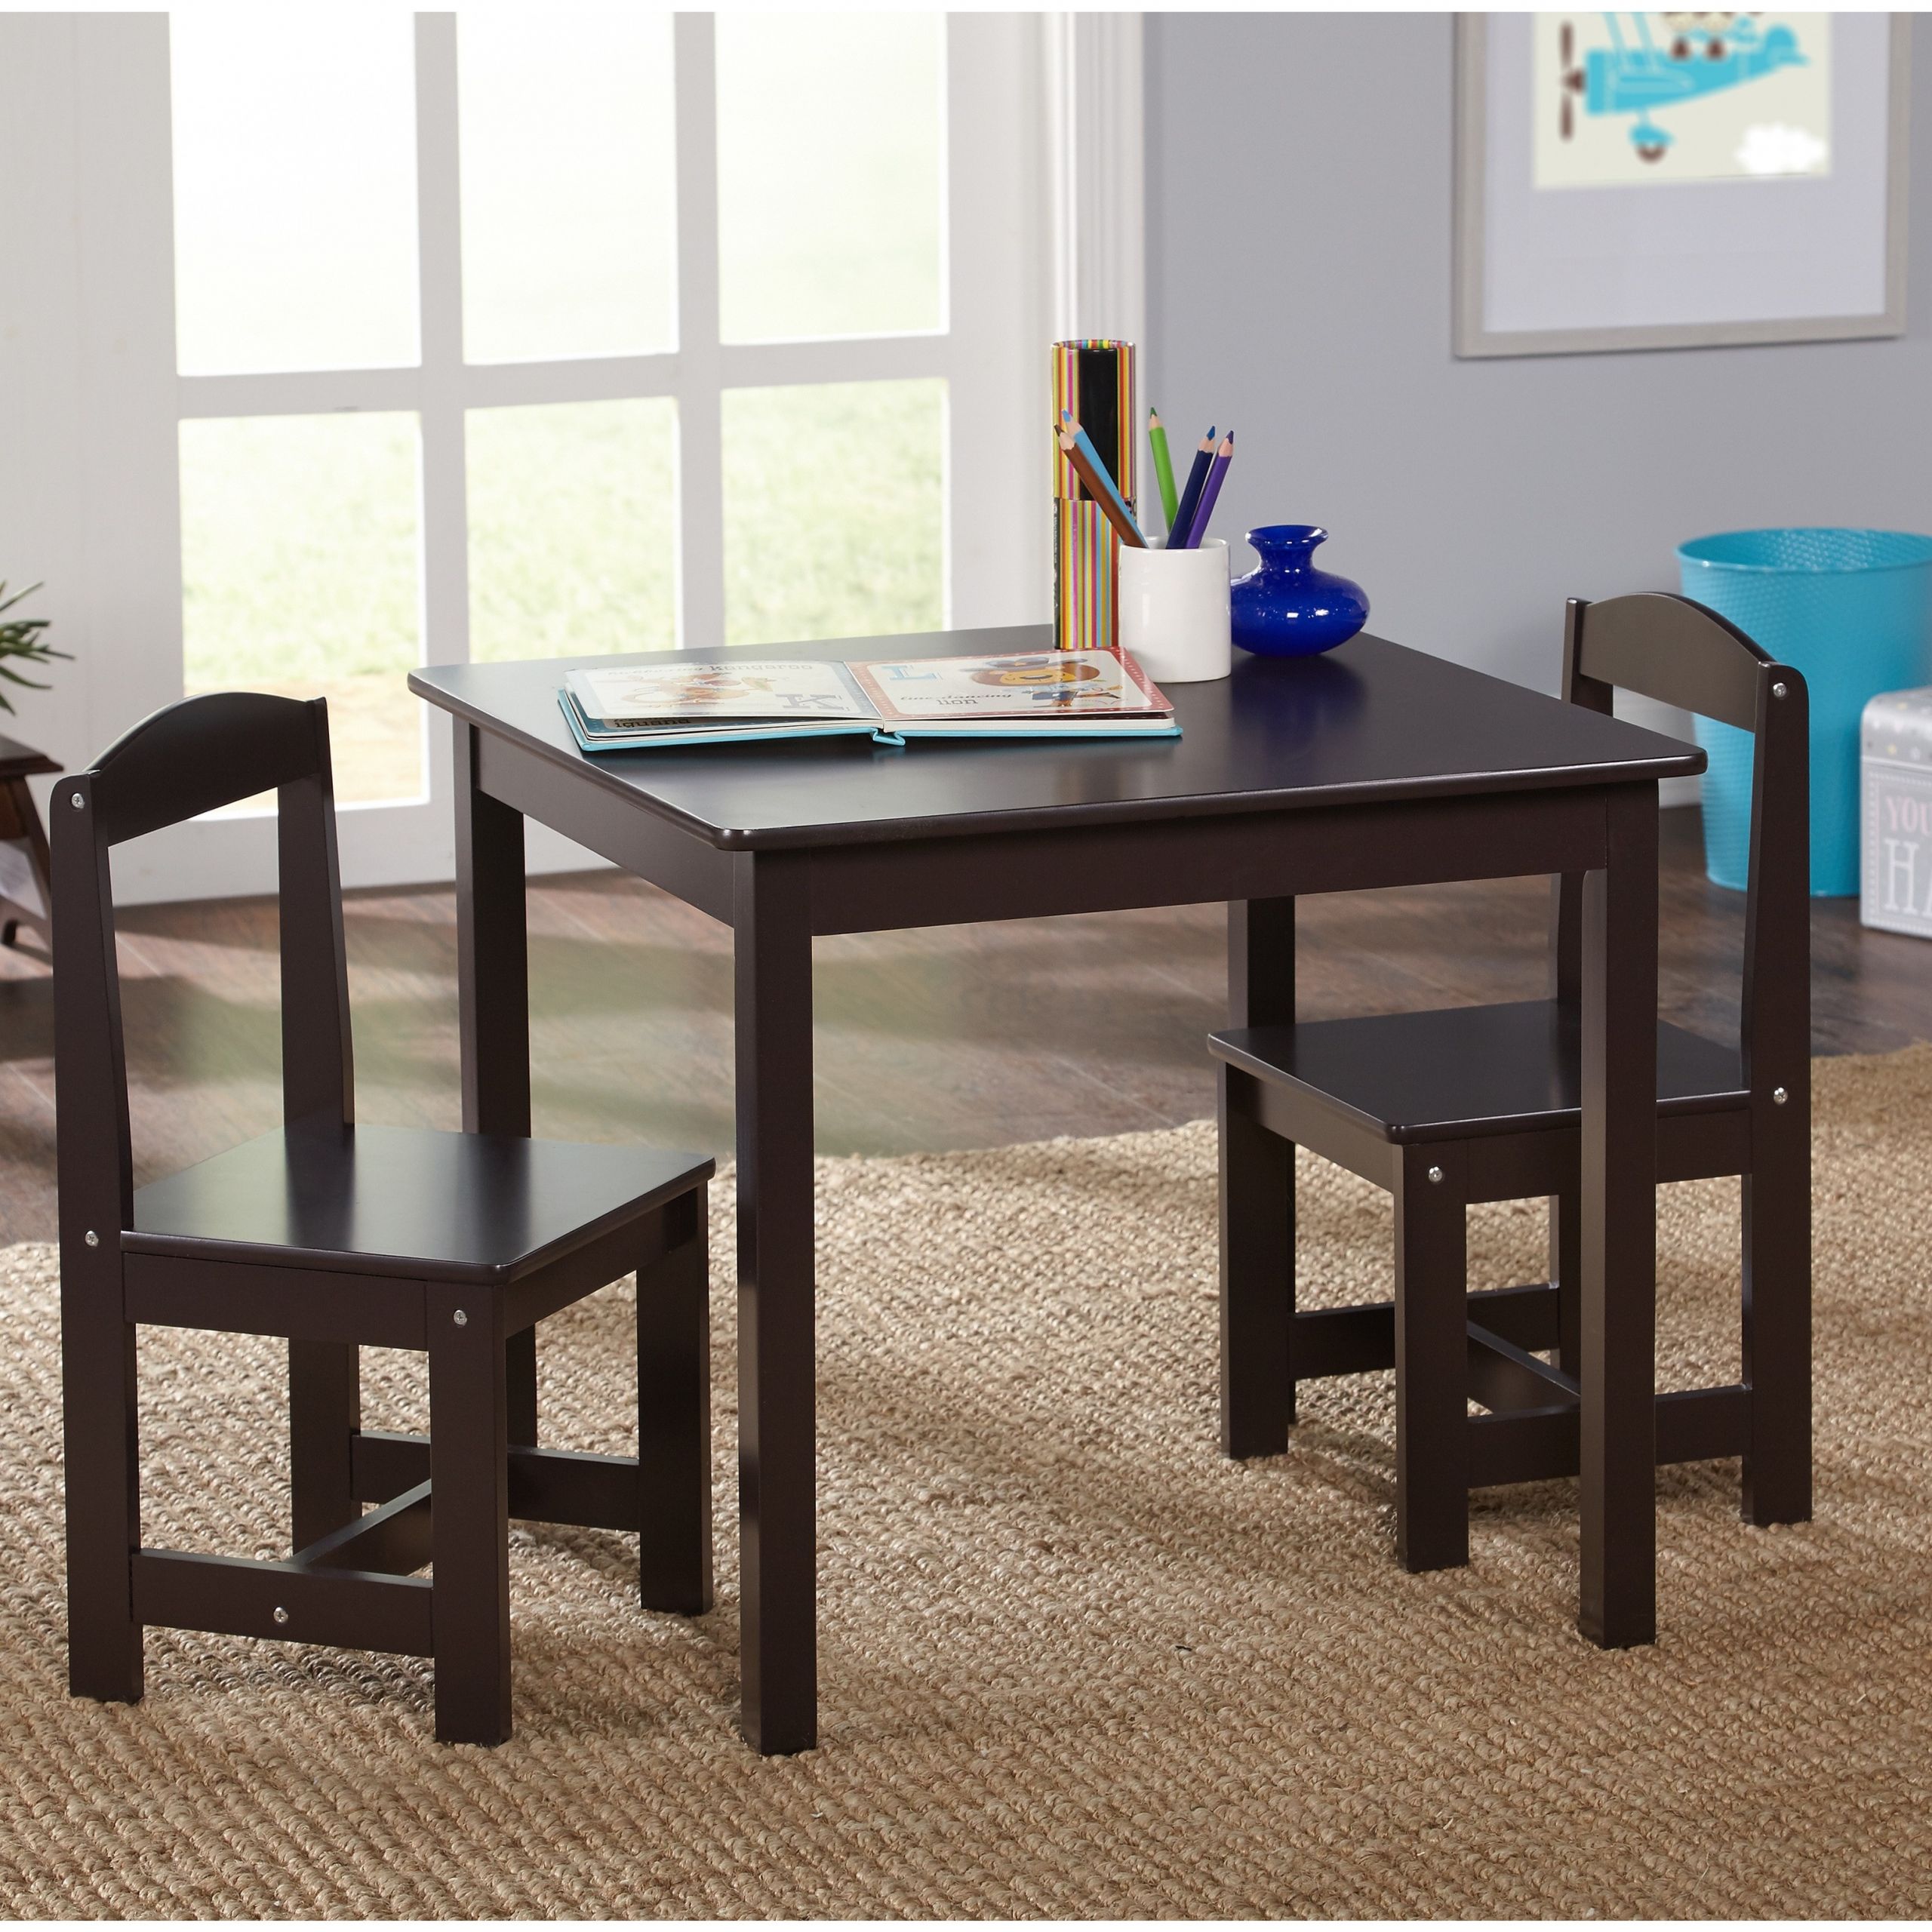 Kids Desk And Chair
 Hayden Kids 3 Piece Table and Chair Set Multiple Colors